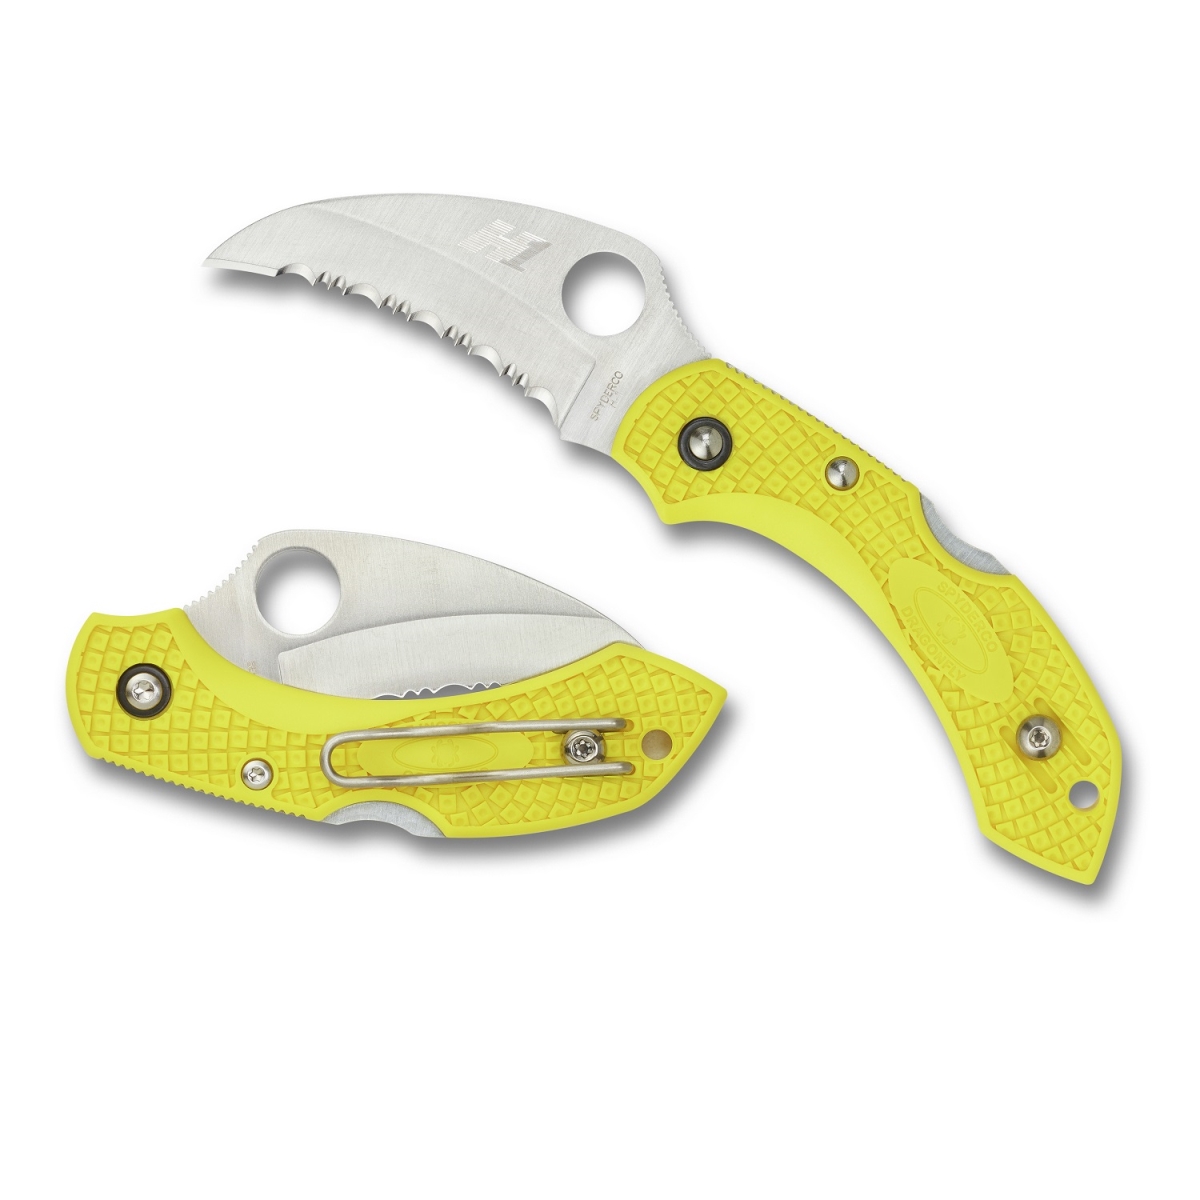 4015986 2.25 in. Dragonfly 2 Knife with H1 Hawkbill Serrated FRN Handle, Yellow -  SPYDERCO